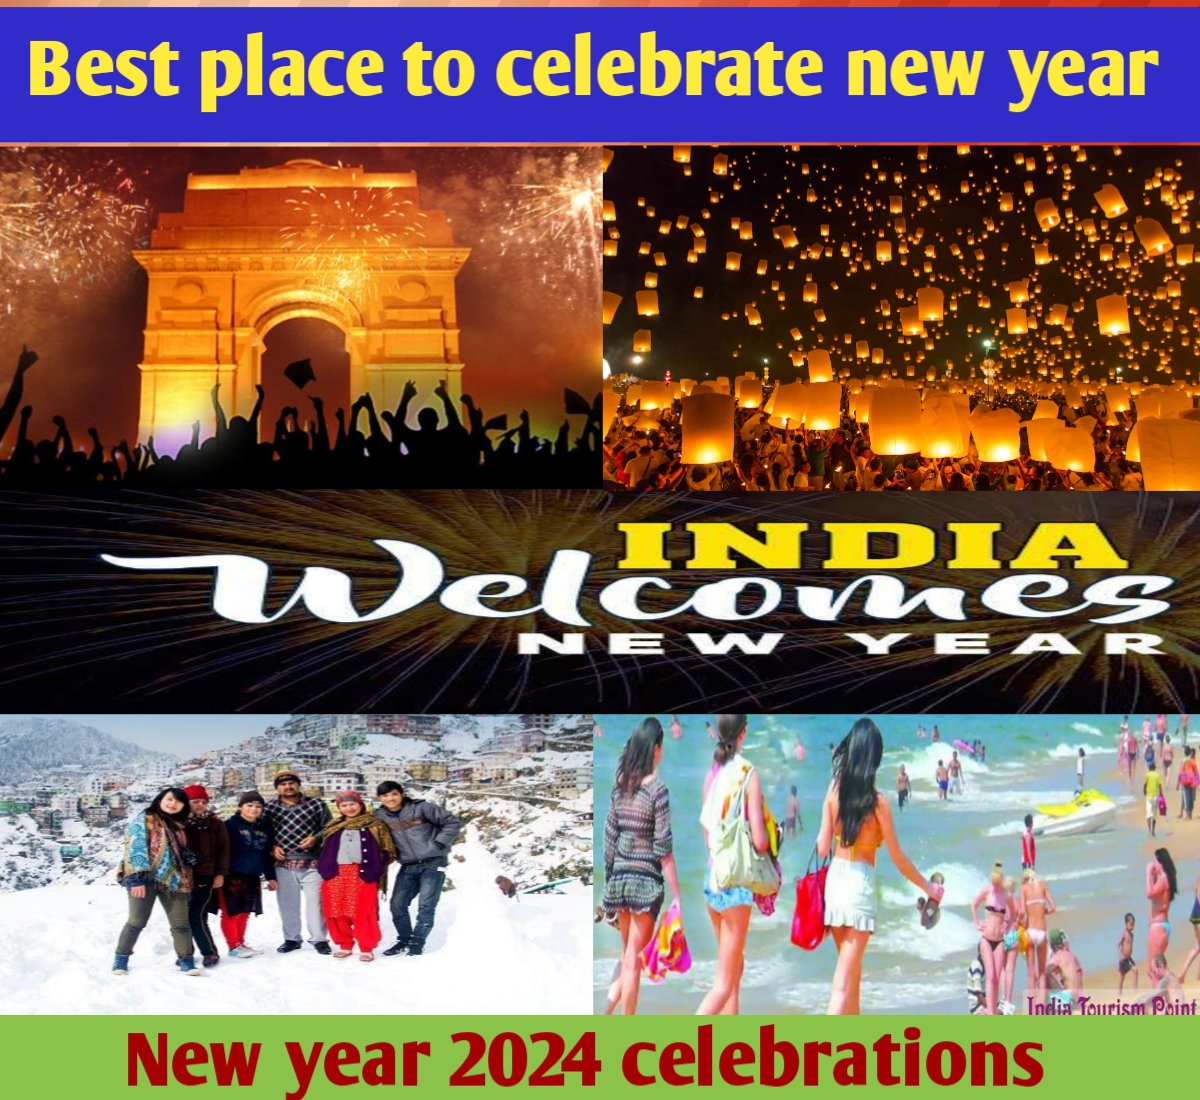 Best place to celebrate new year in india: